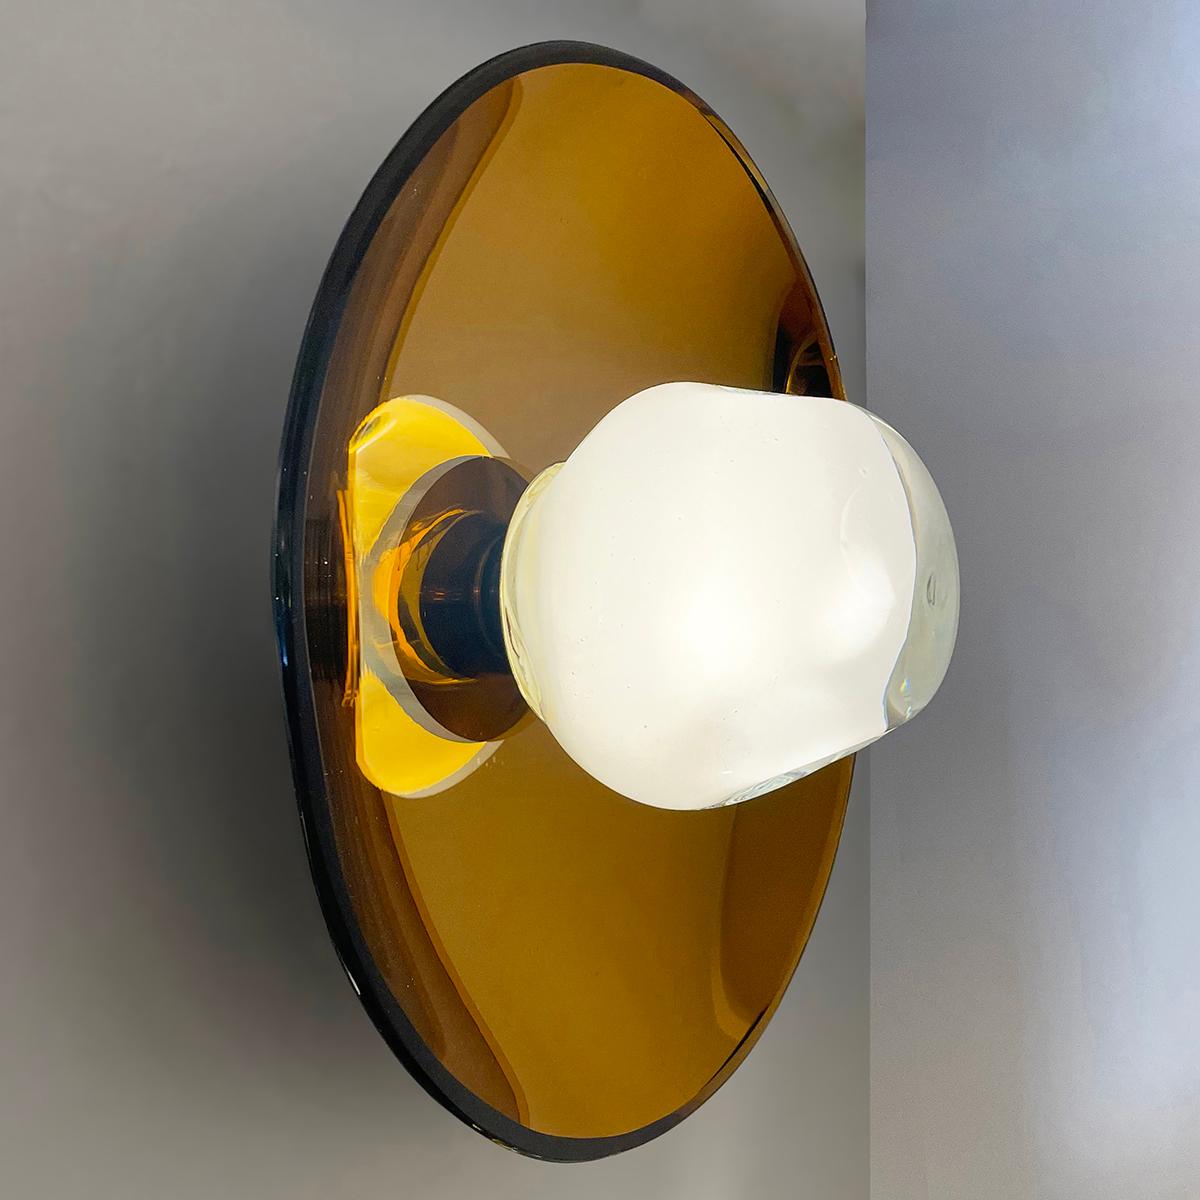 The versatile Sole light can be installed as a ceiling light or wall light and features our handblown Sfera glass mounted on a colored reflective glass dish. Shown with the amber colored reflective glass and polished brass hardware.

The concave